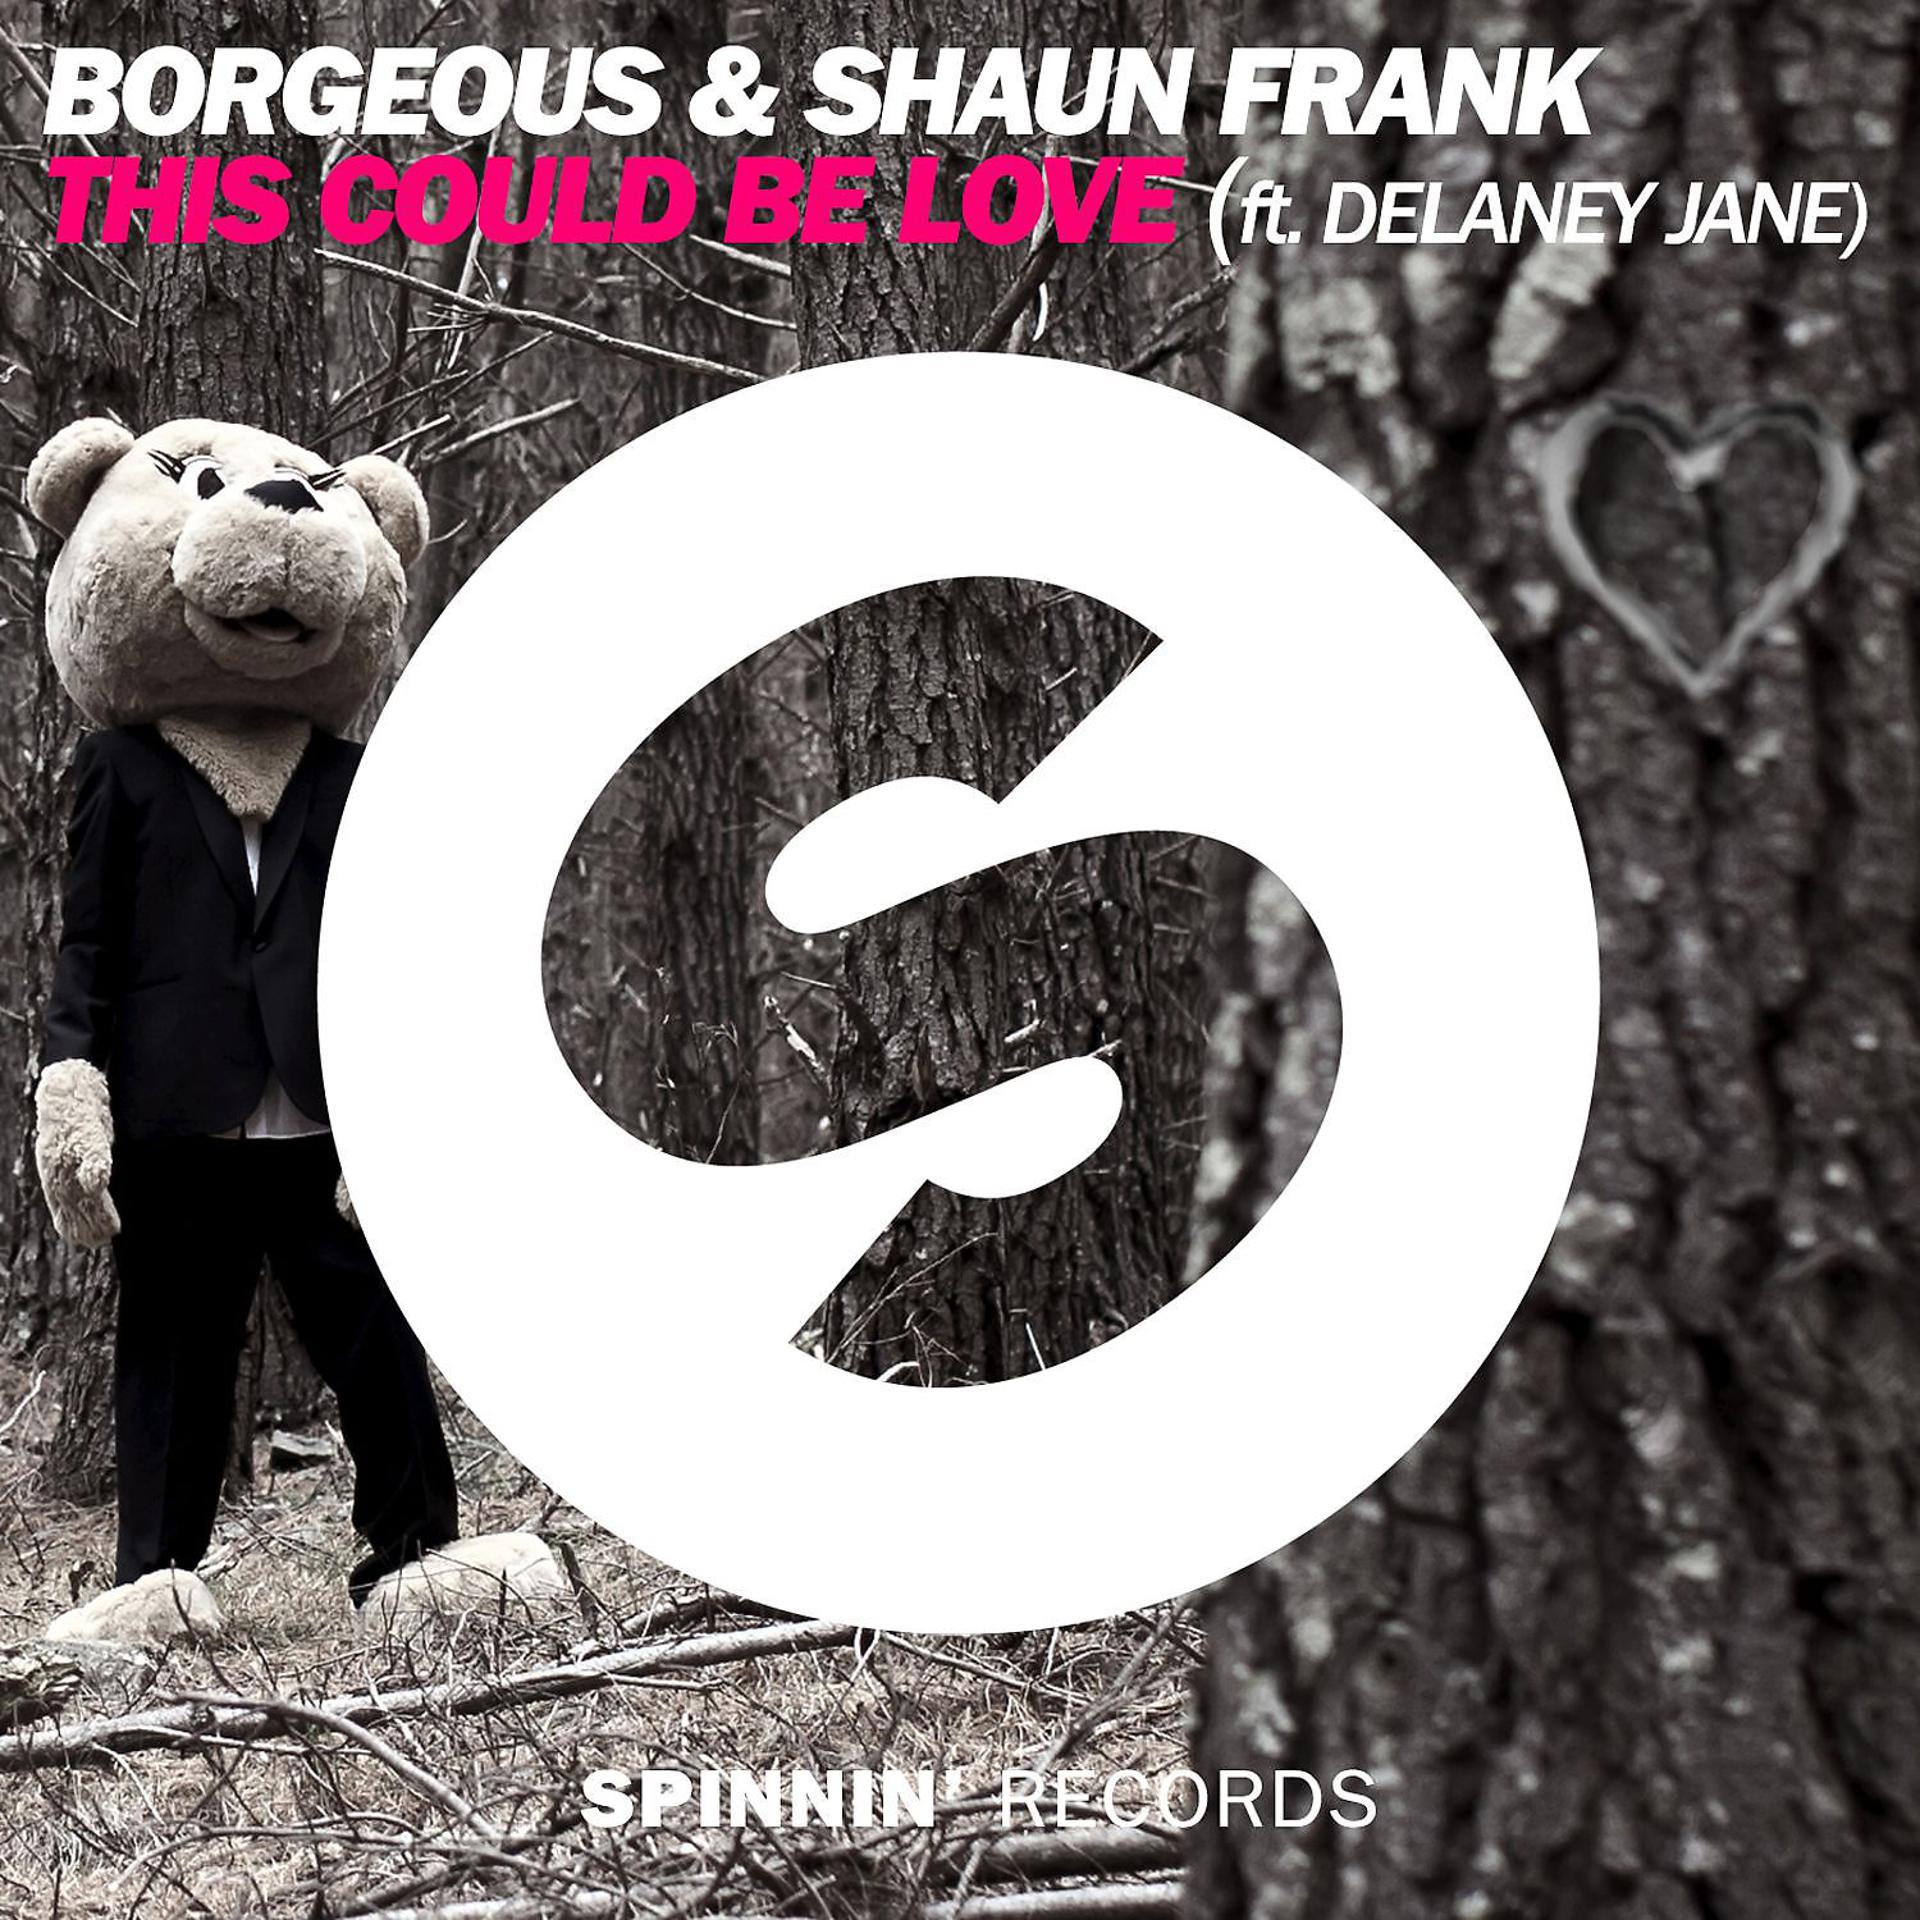 This could b us. Spinnin records. Borgeous. Альбом Spinnin records. Delaney Jane.